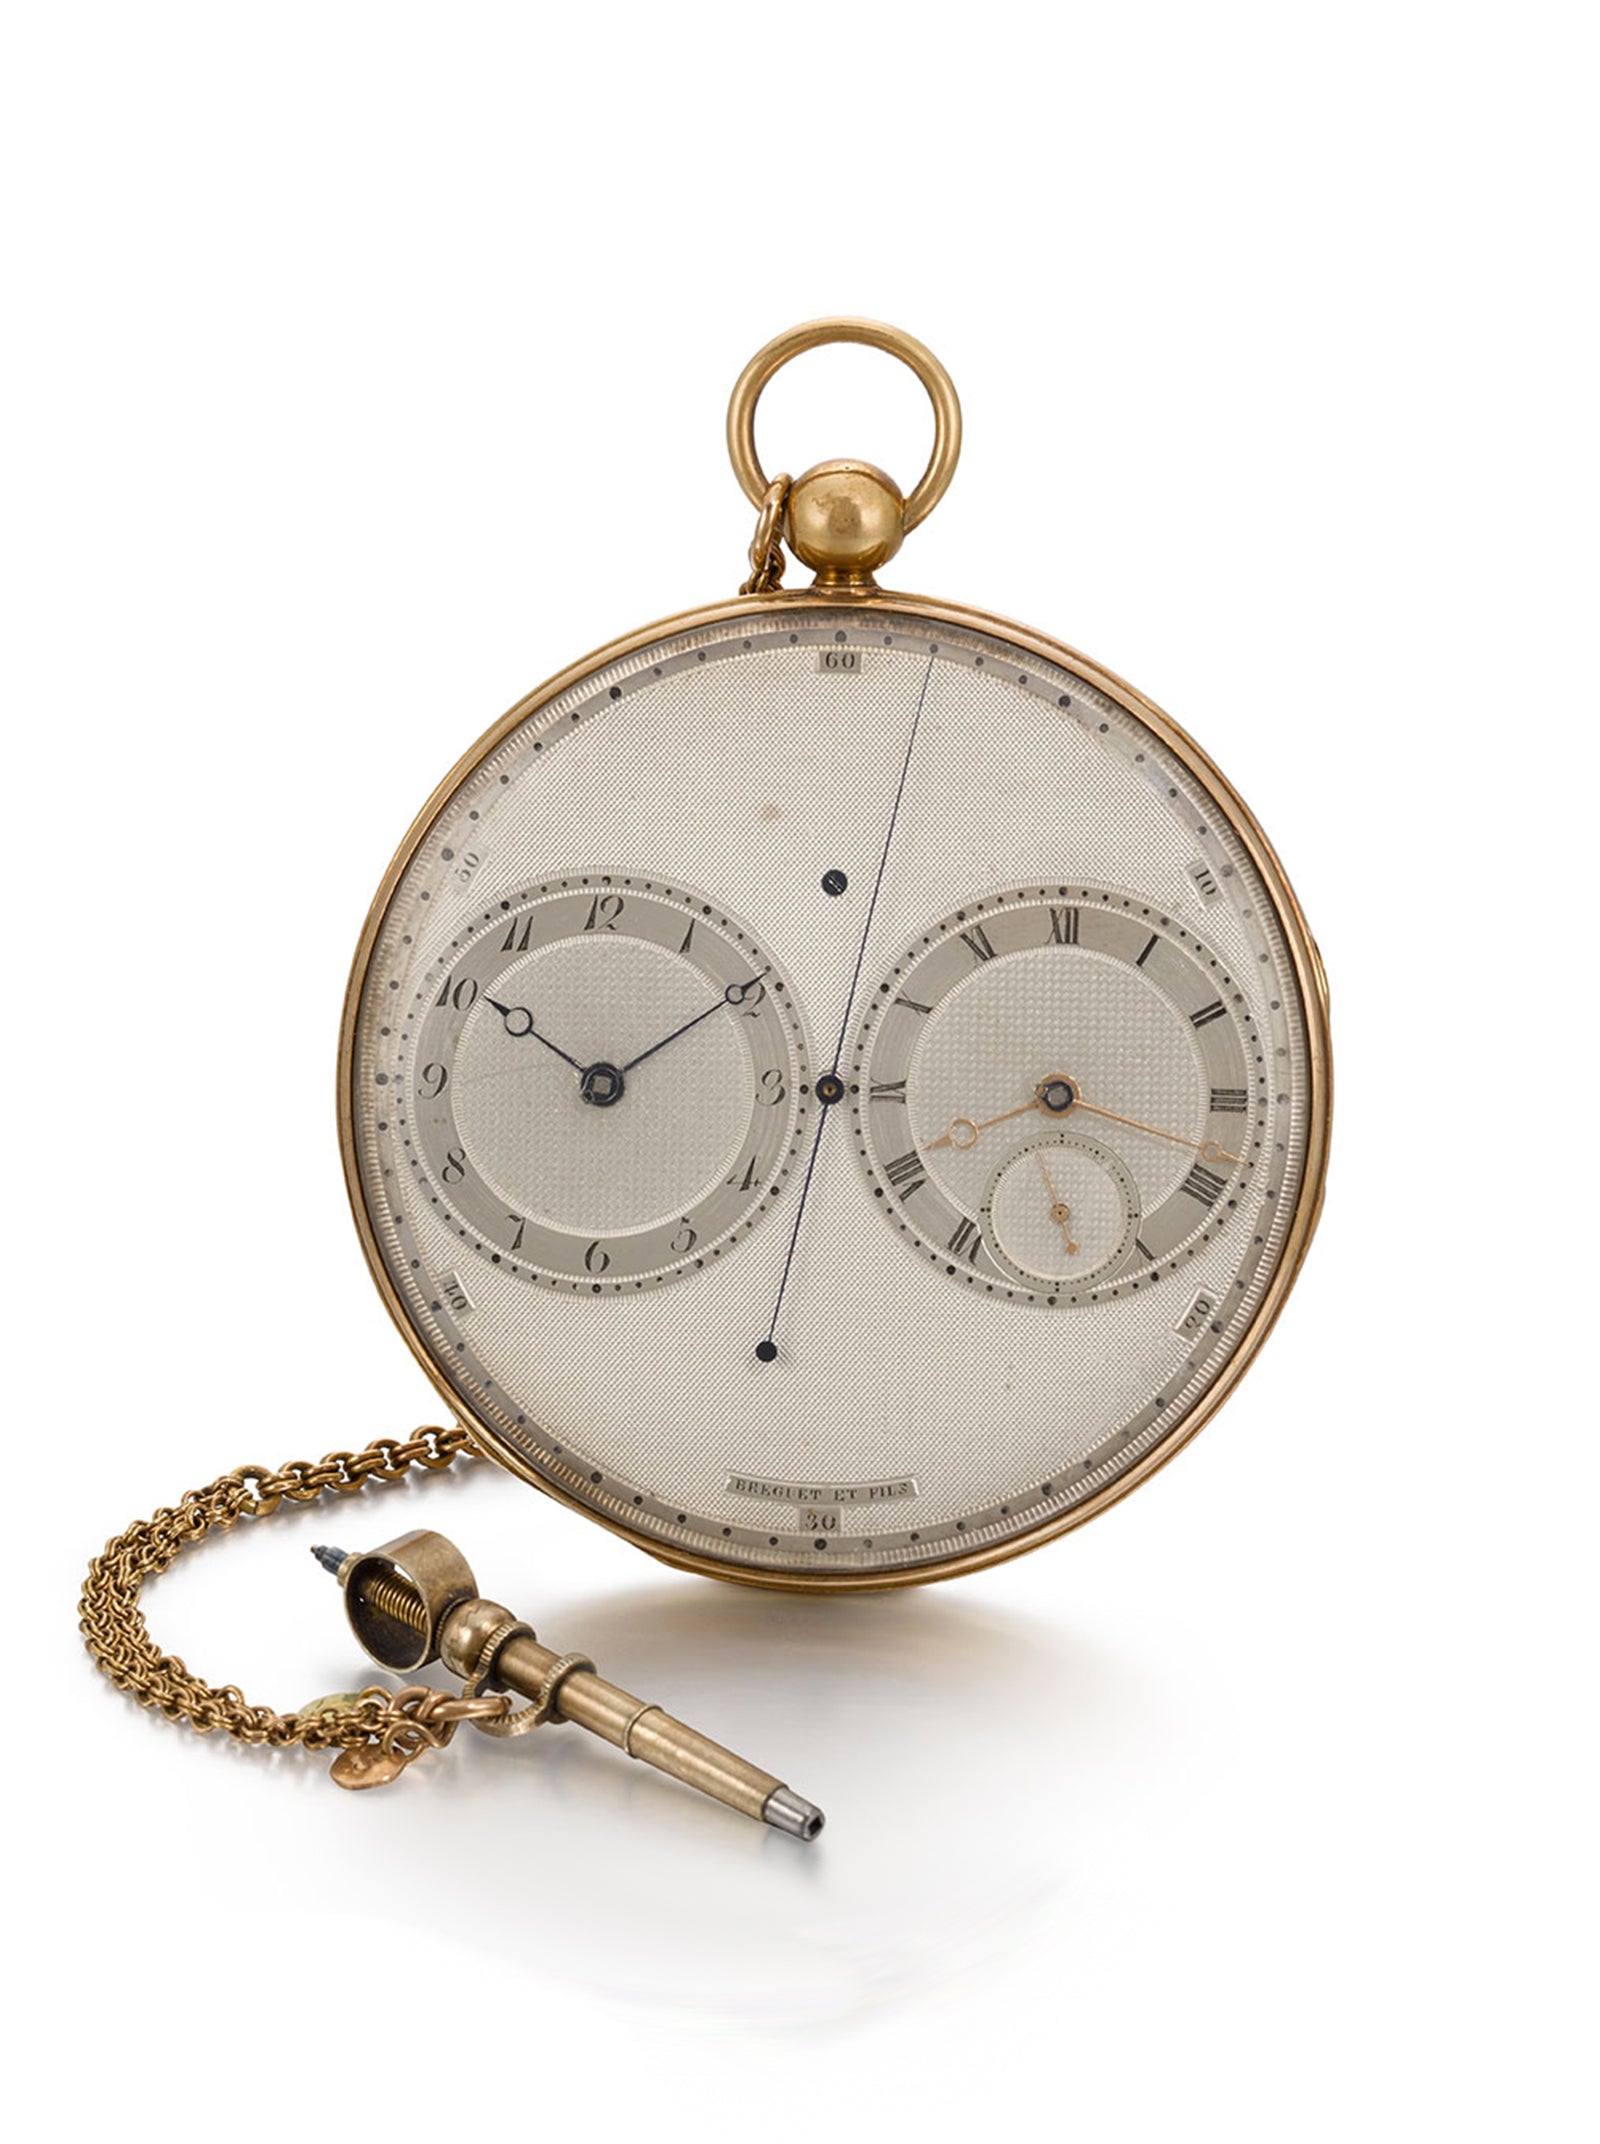 Breguet Resonance pocket watch front in Chasing Accuracy in Mechanical Wristwatches for A Collected Man London